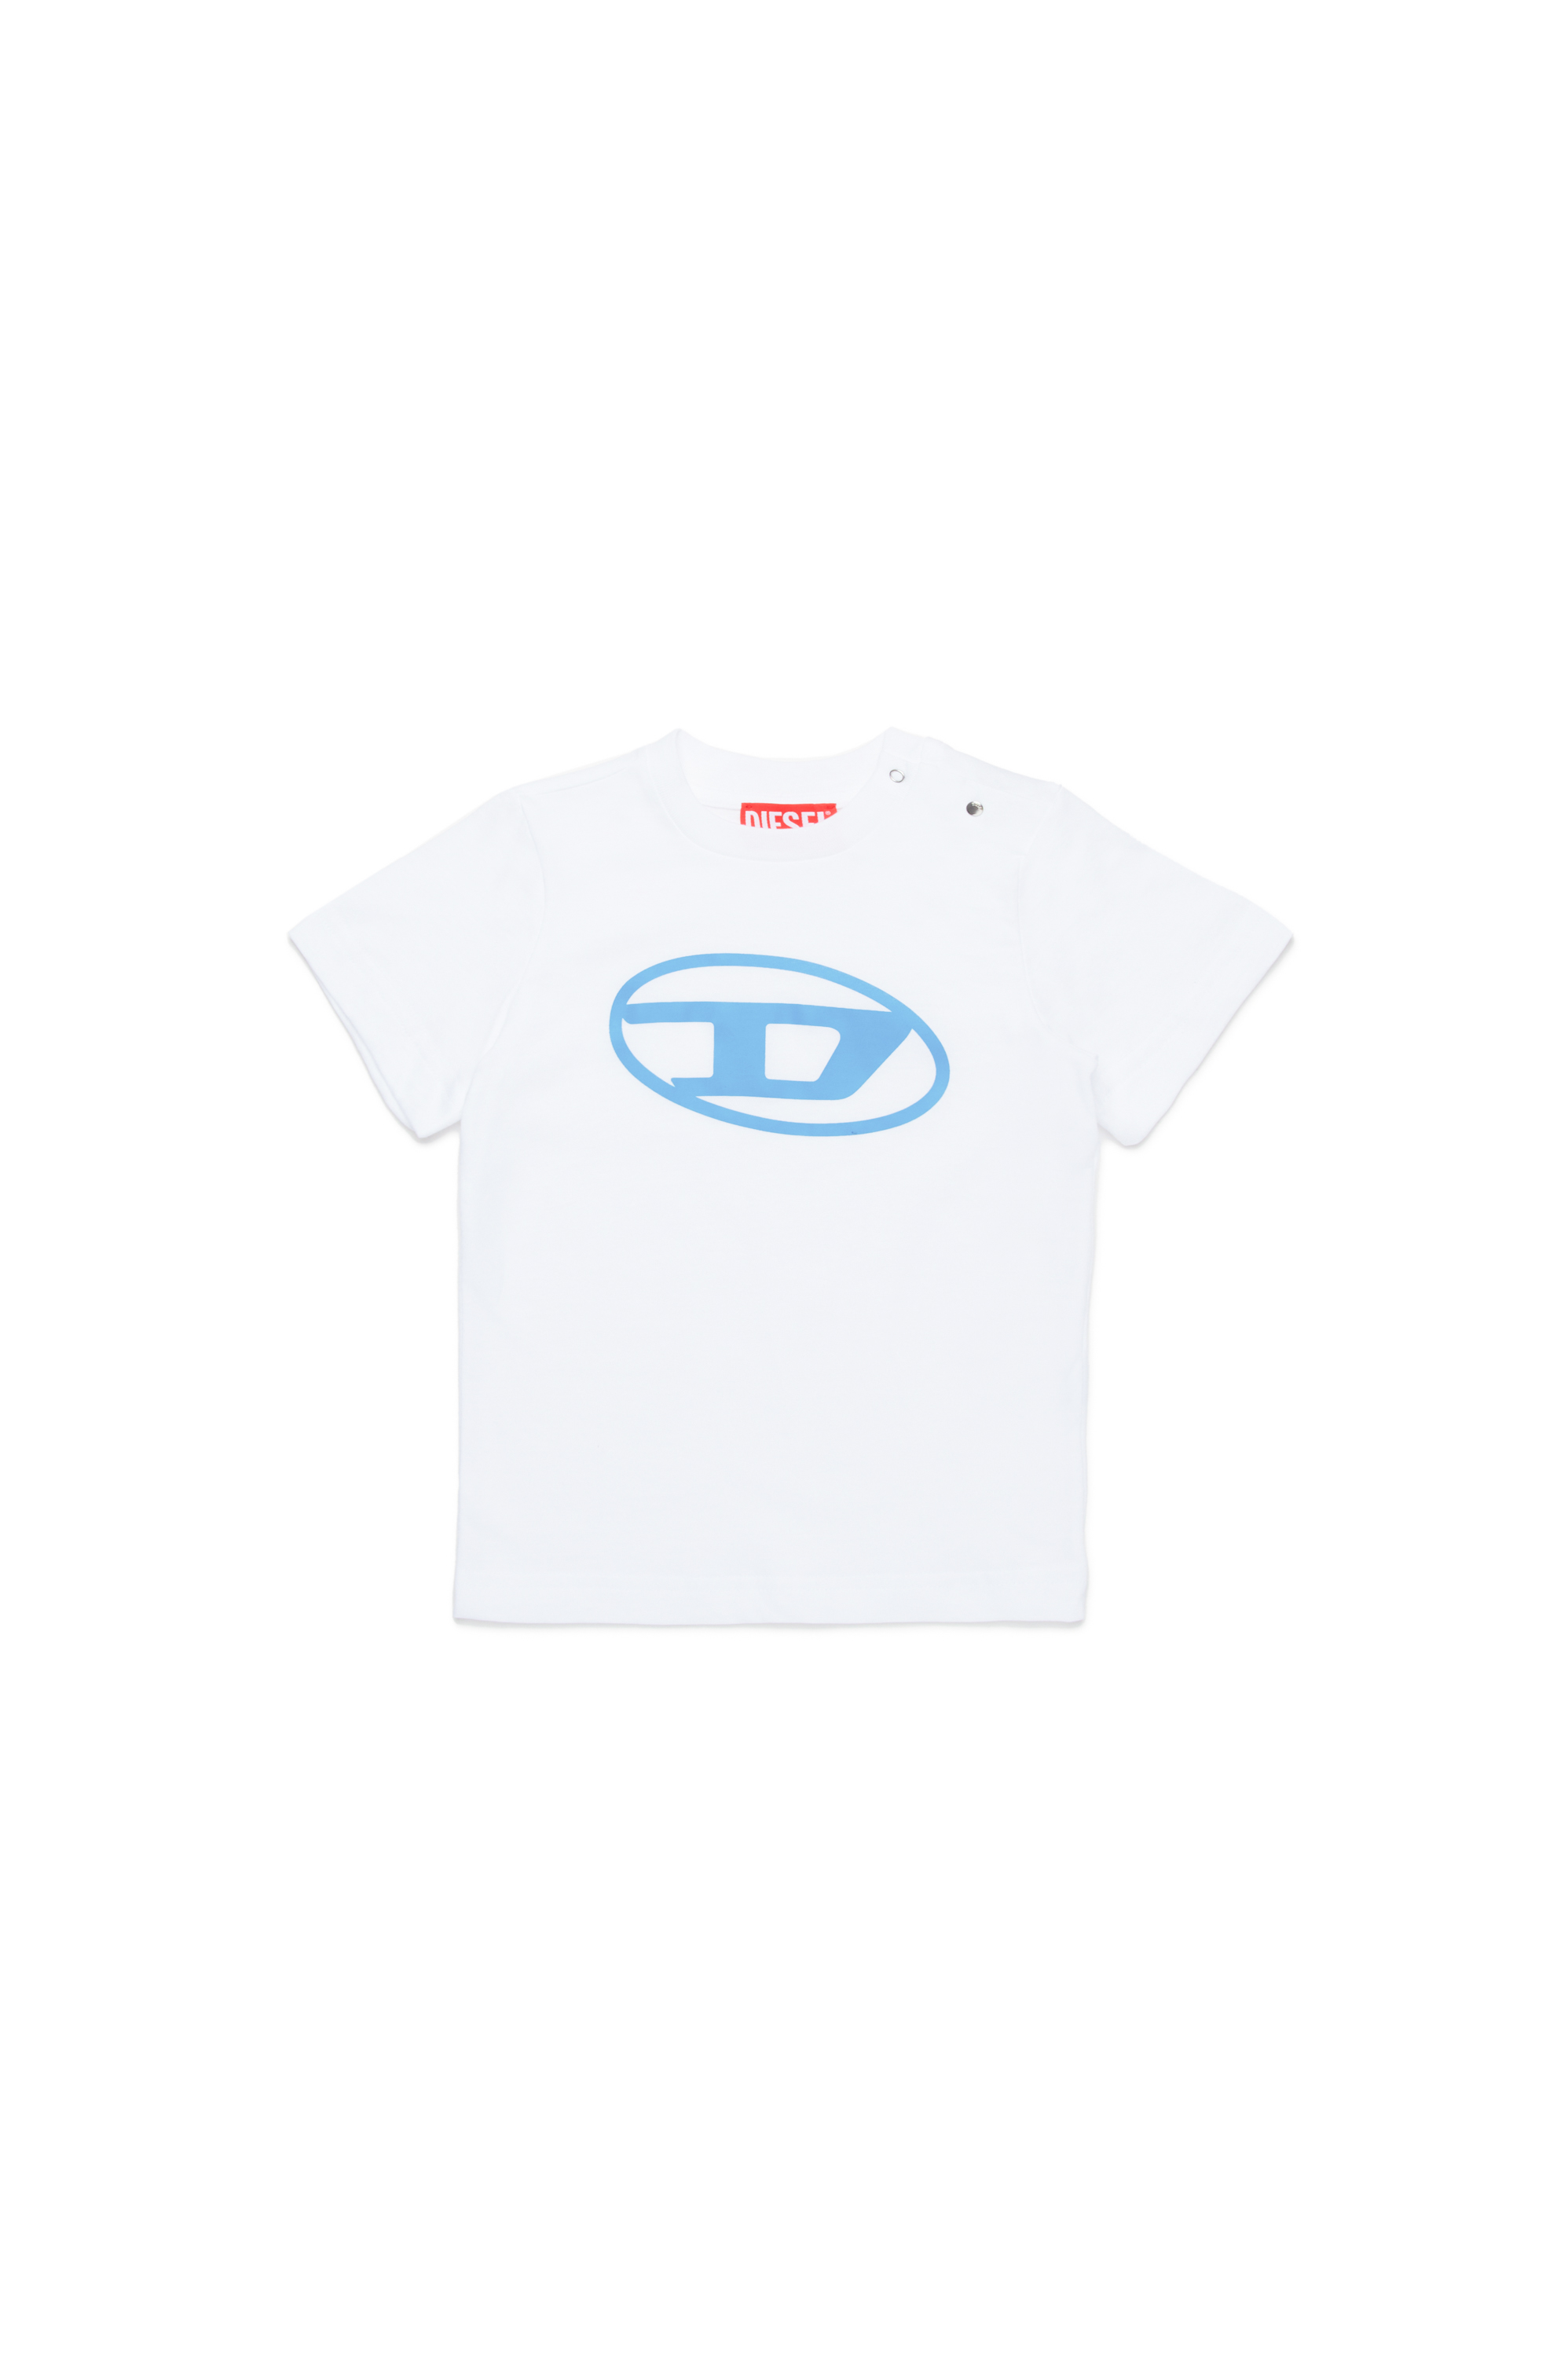 Diesel - T-shirt with Oval D logo - T-shirts and Tops - Unisex - White